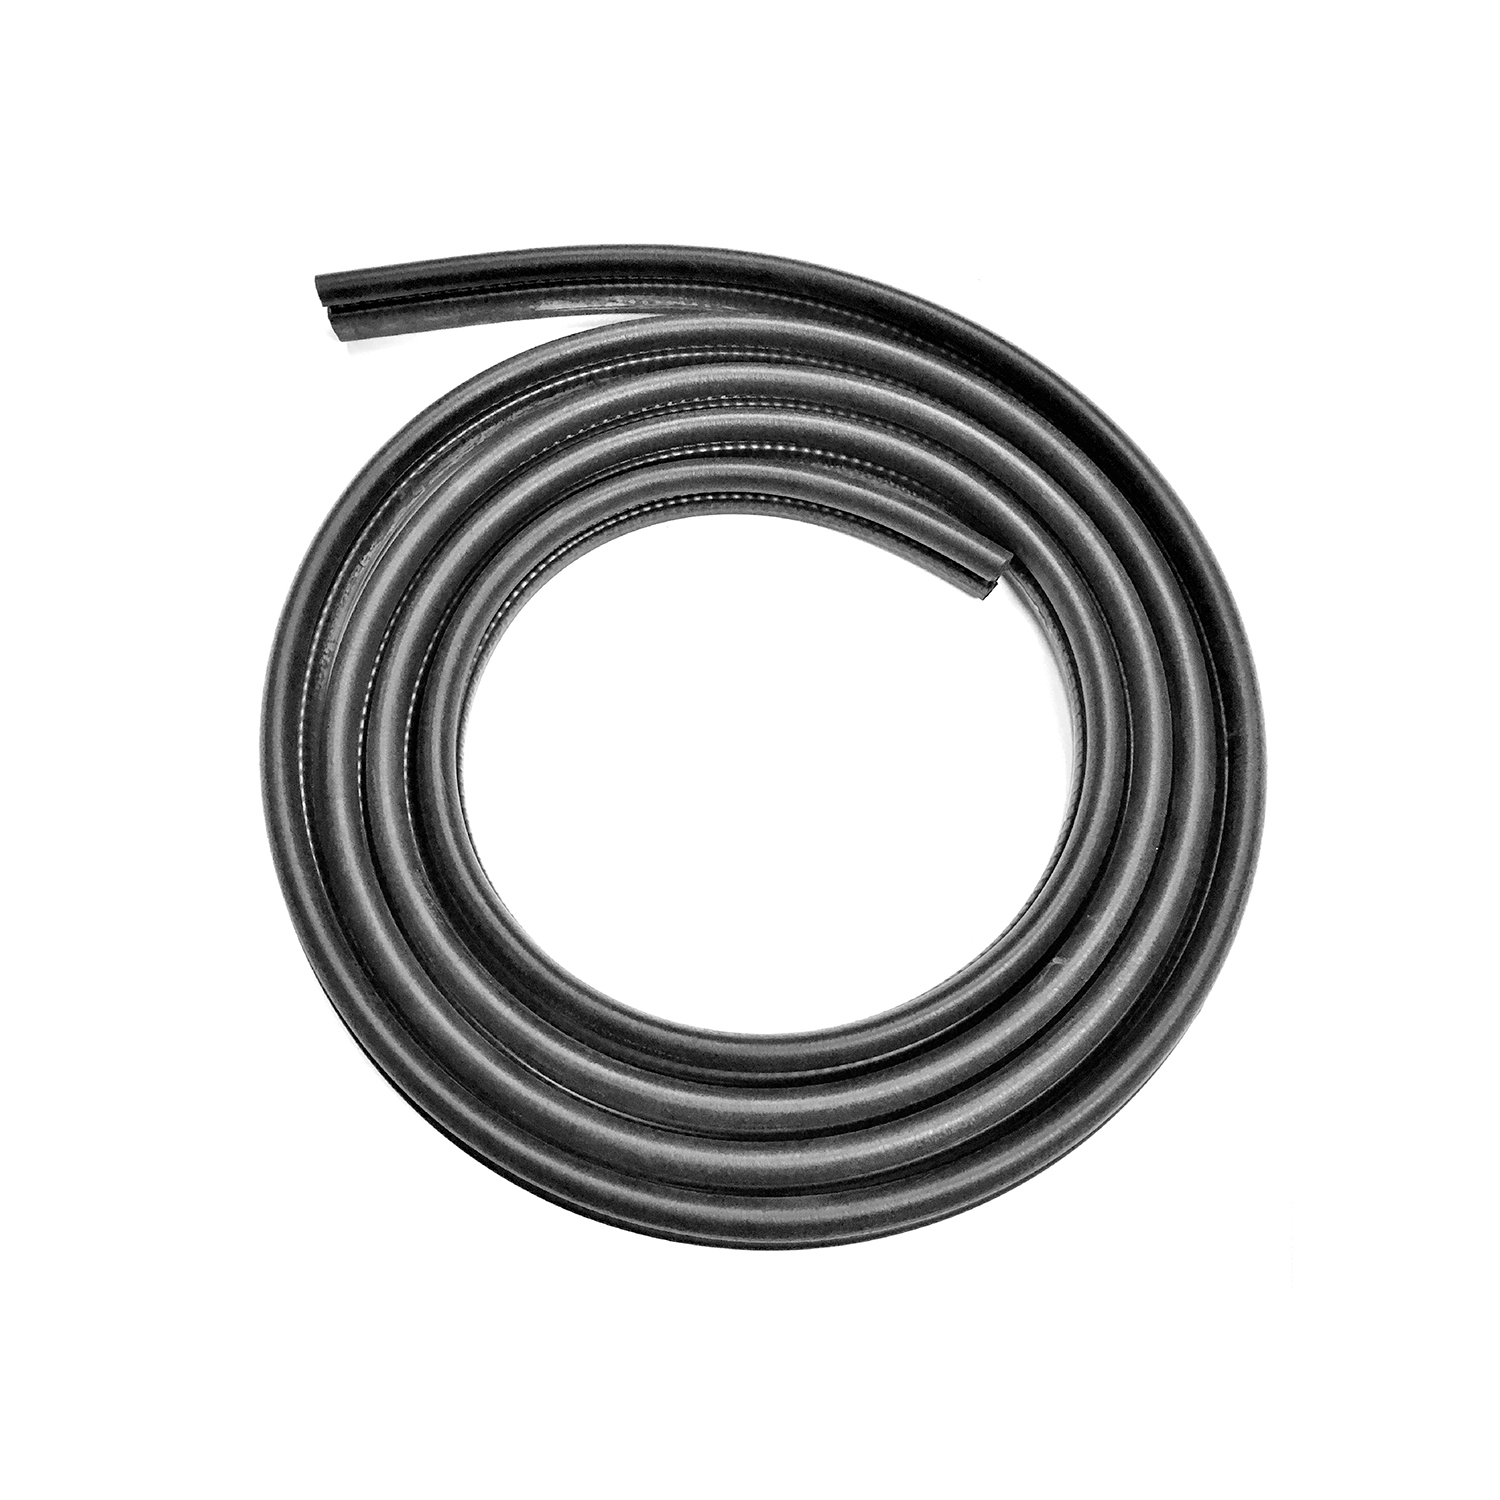 2005 Ford E-350 Super Duty Door seal, '04-'14 Ford E-Series full size van models, fits front left or right-LM 110-VH